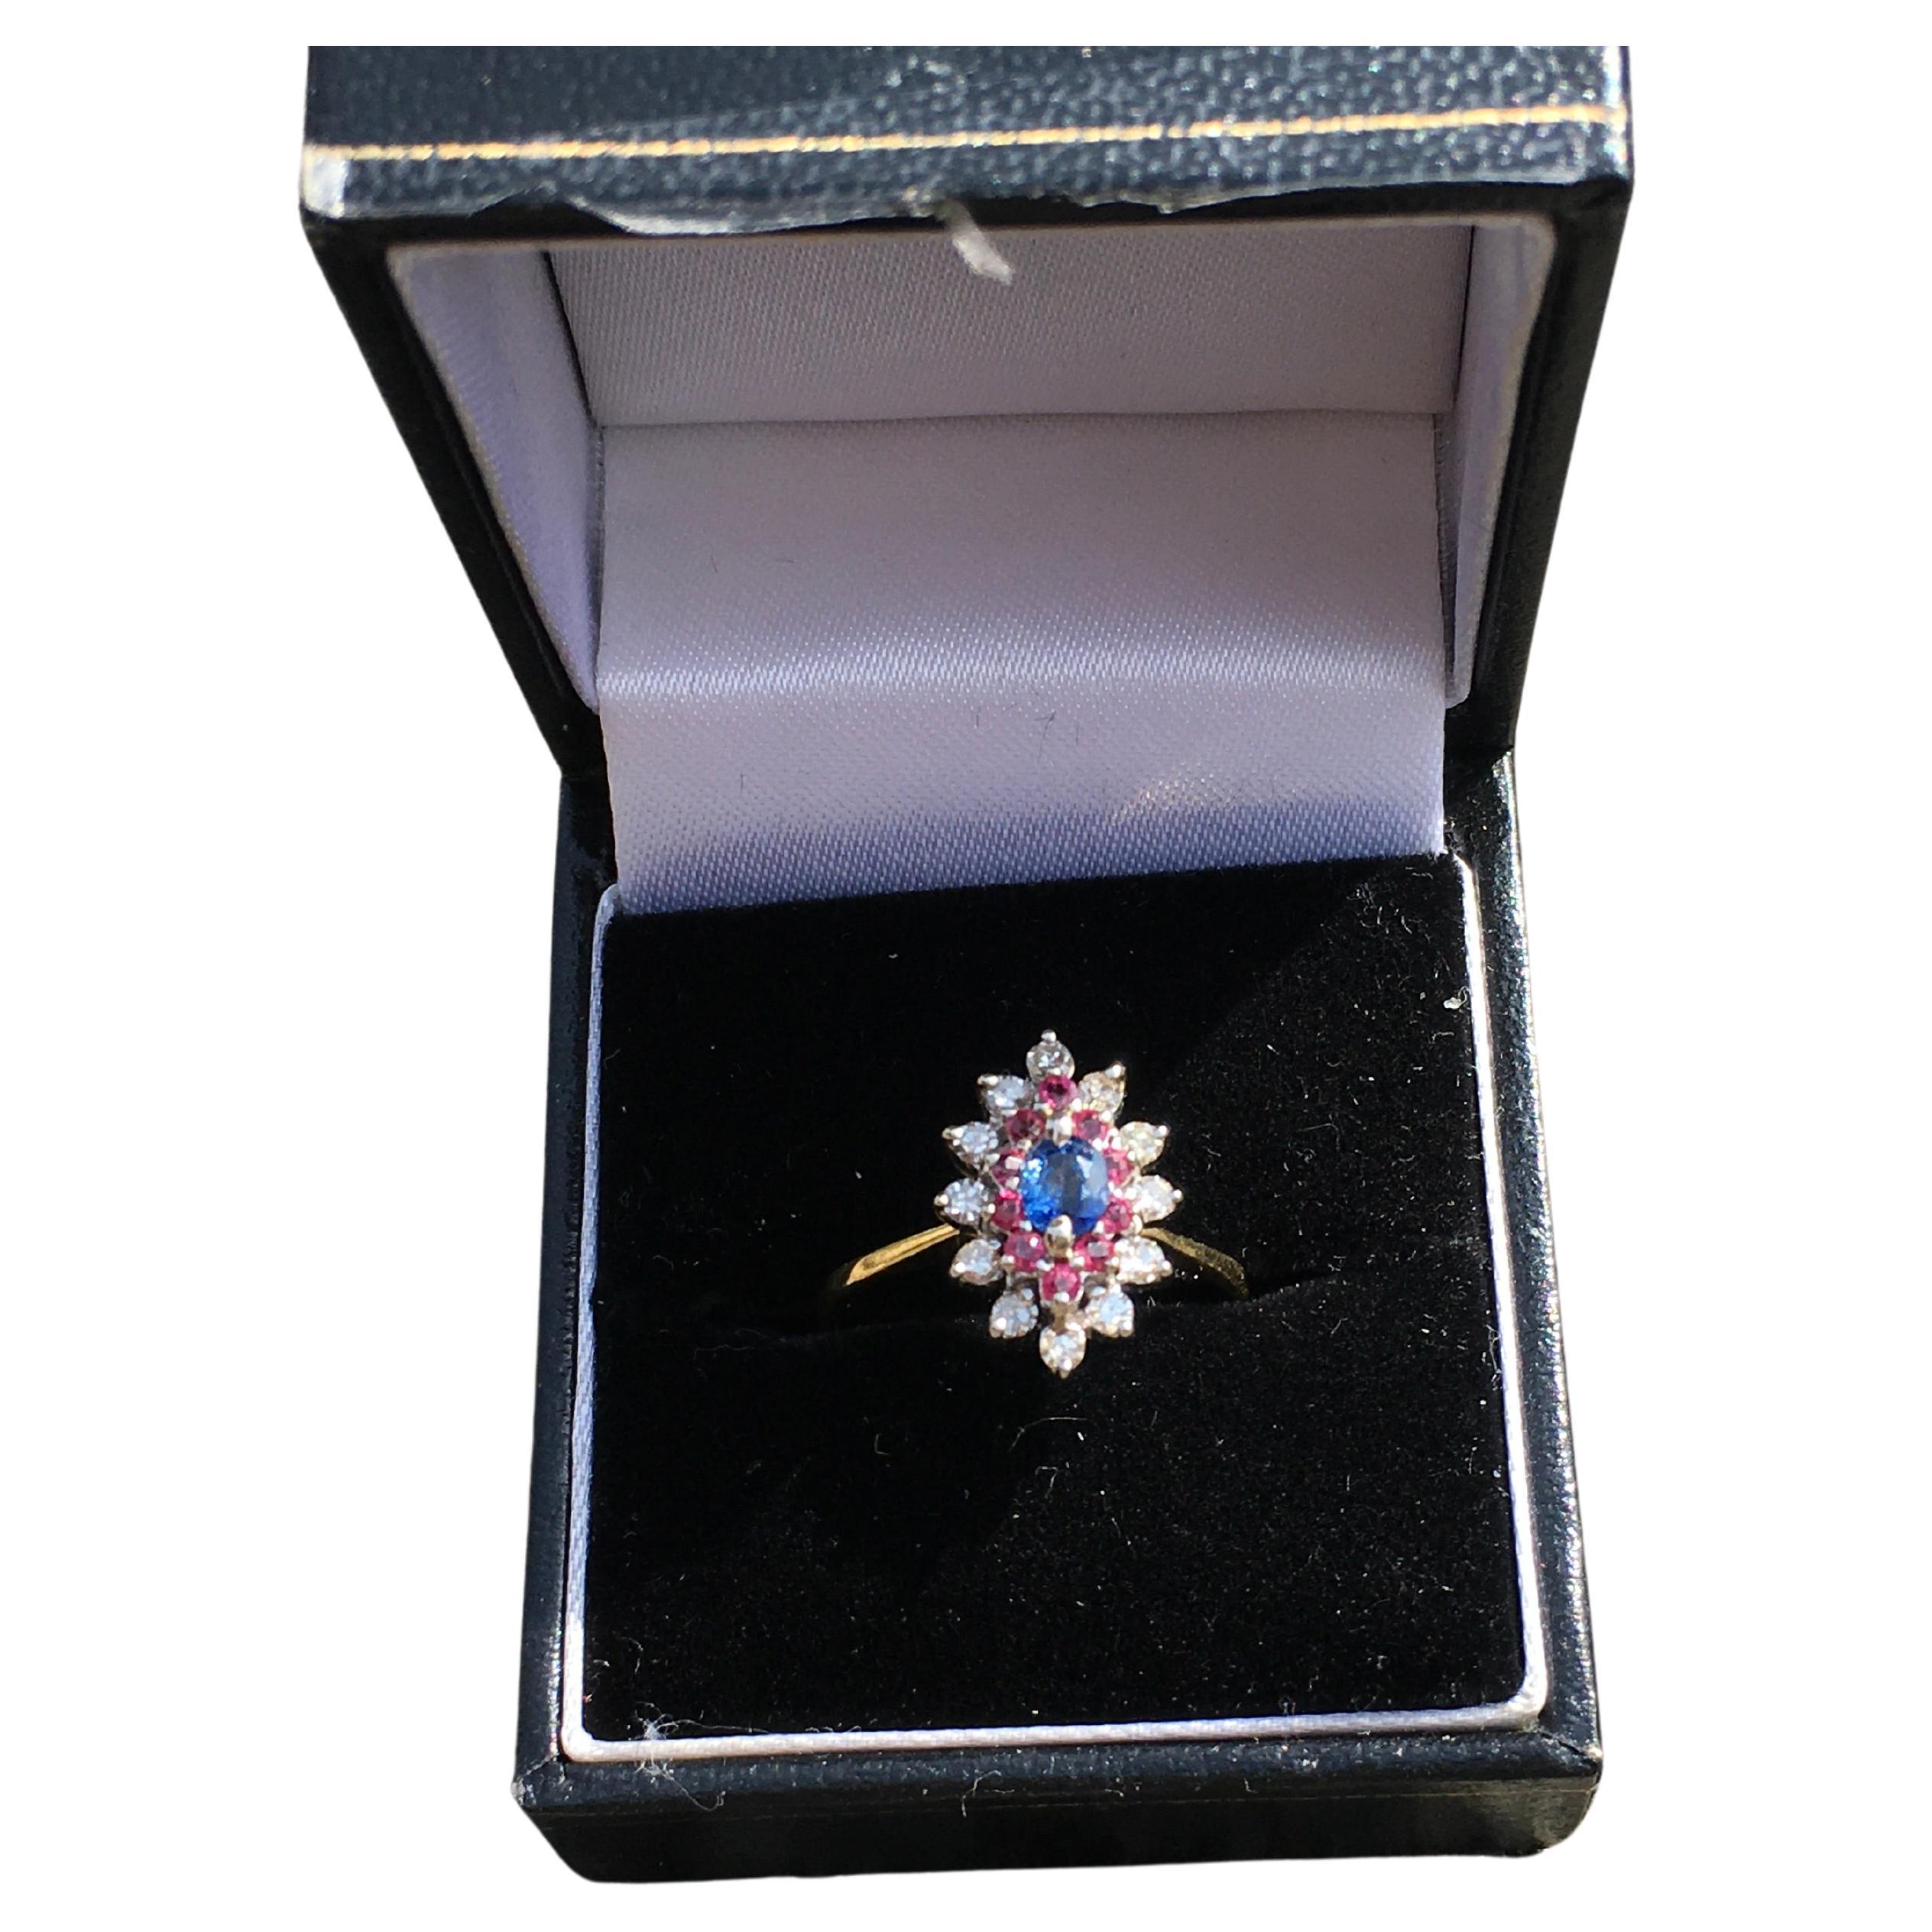 Stunning vintage 18 carat yellow gold marquise ring.
Made in the UK
In very good condition 
Set with a sapphire in the center approx 5 mm x 4 mm
Surrounded by 10 rubies followed by 12 diamonds. 
Ring head measures 1.5 cm long x 1 cm wide.

Weight 3